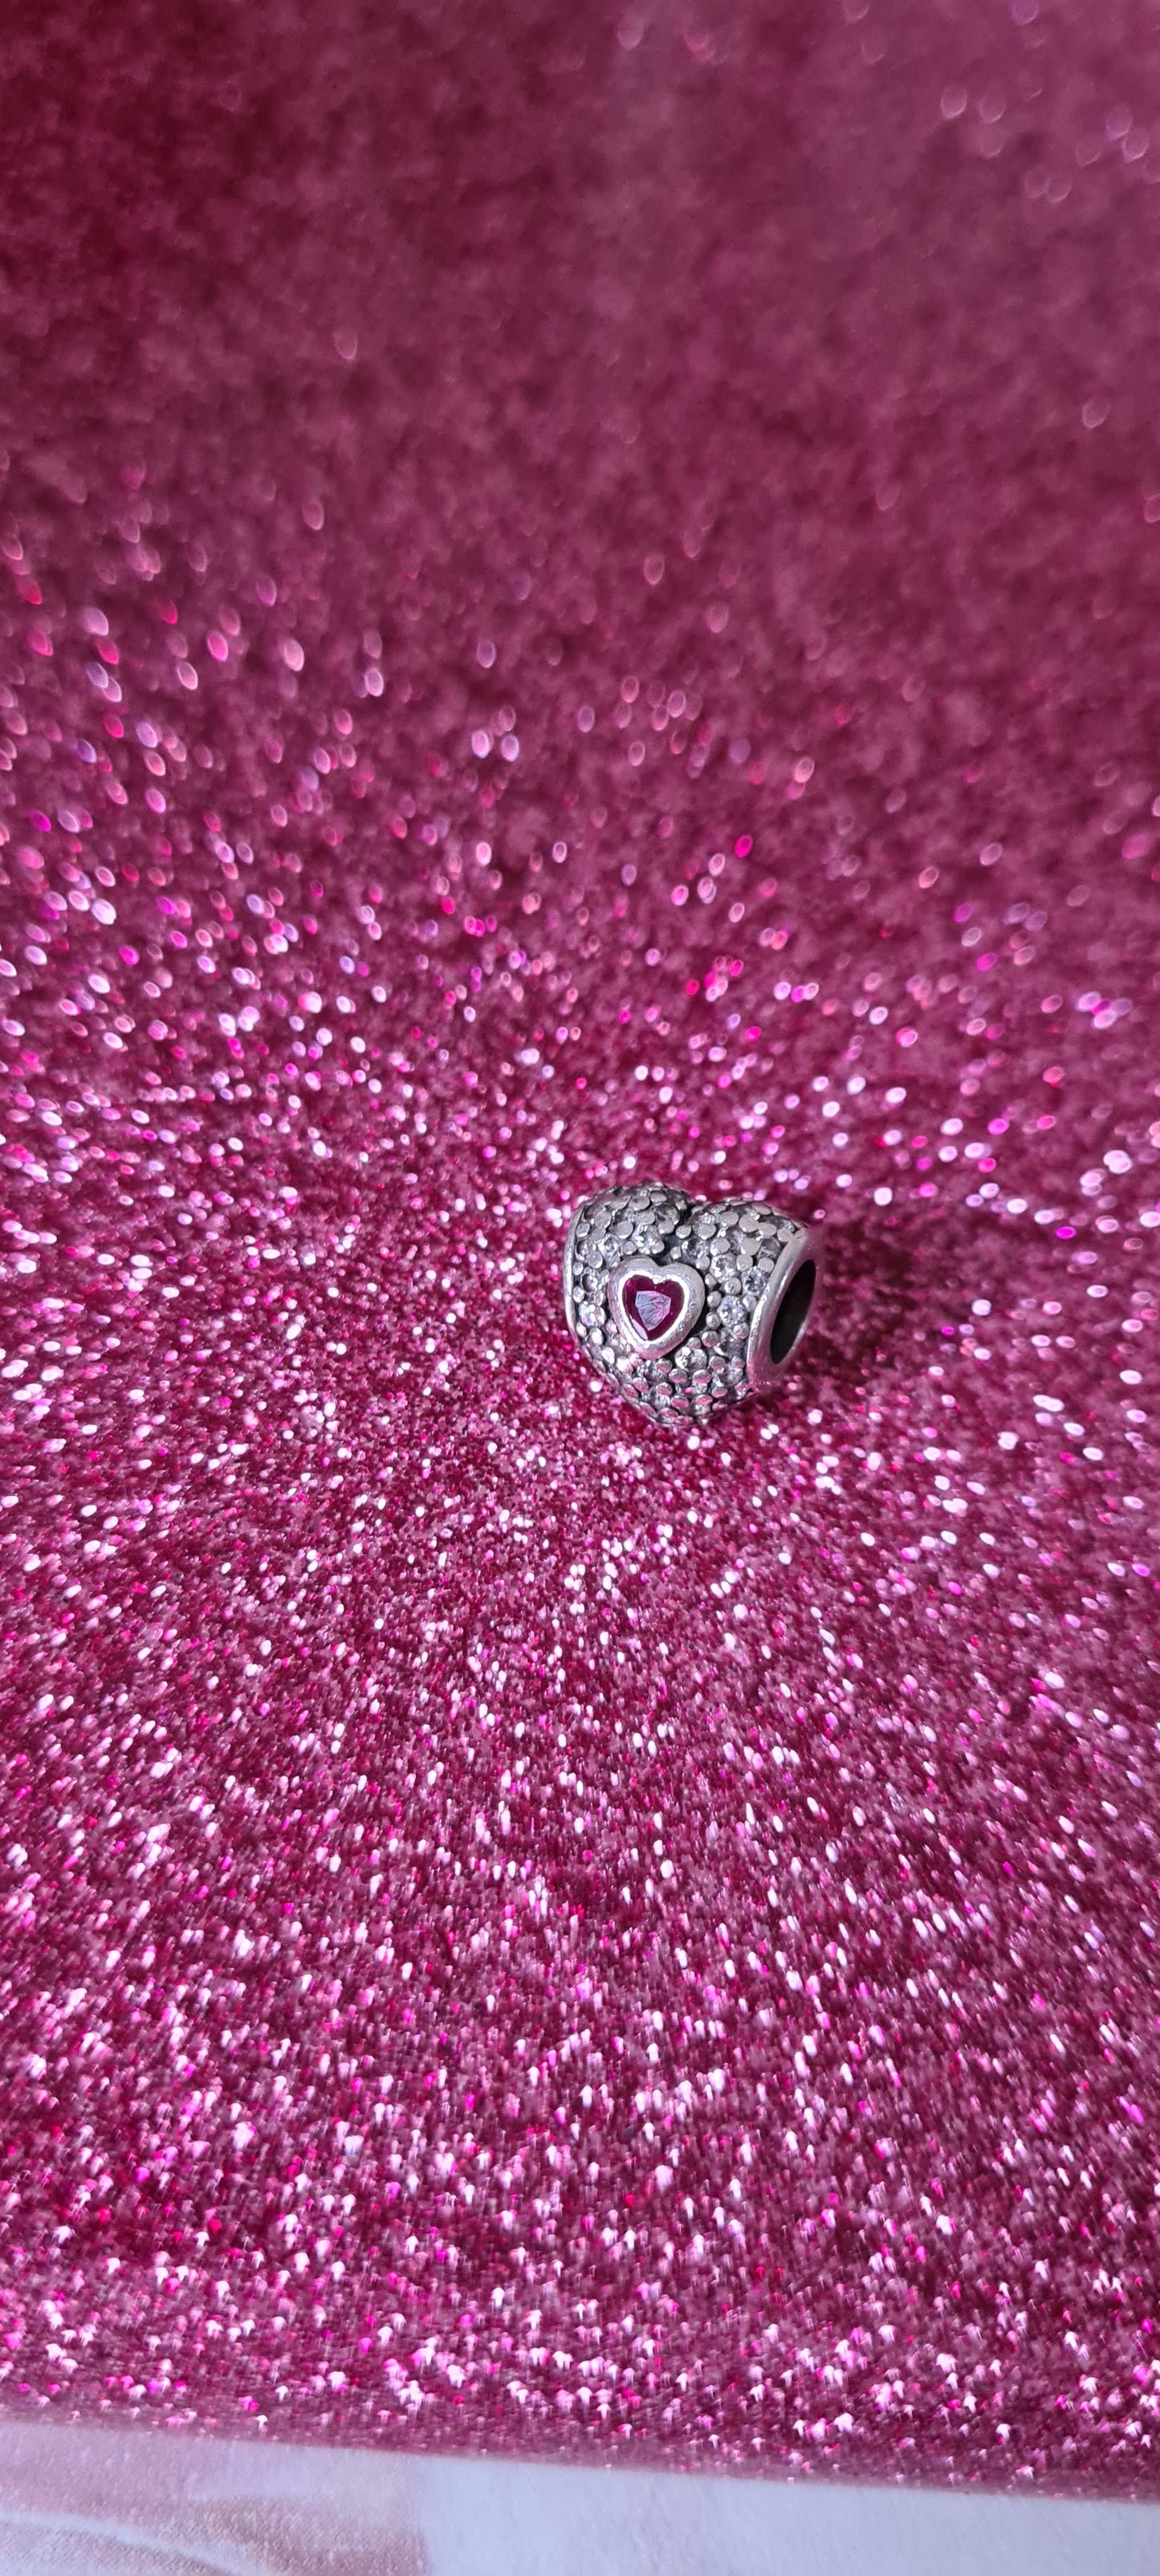 Genuine Pandora Pave Heart in A Heart Sparkle Clear Charm